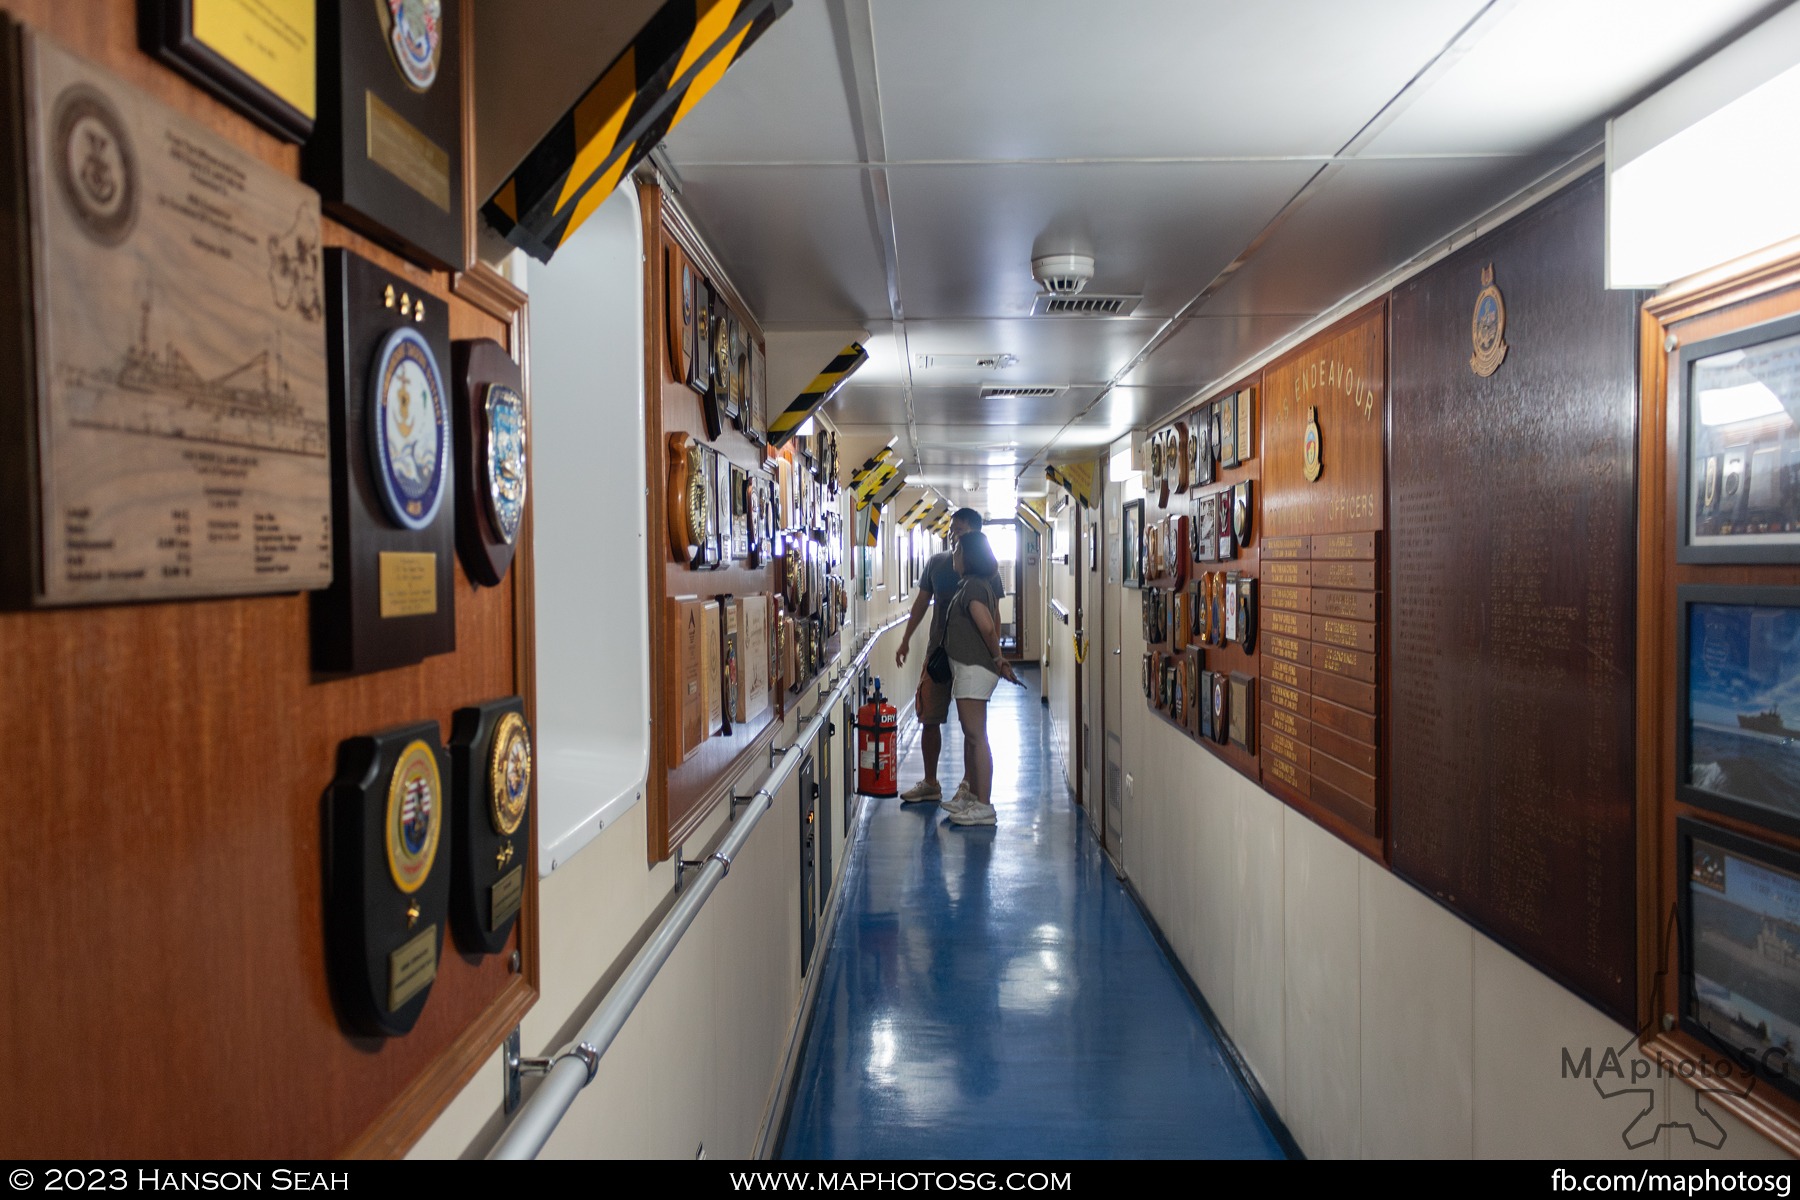 One of the many corridors in the RSS Endeavour